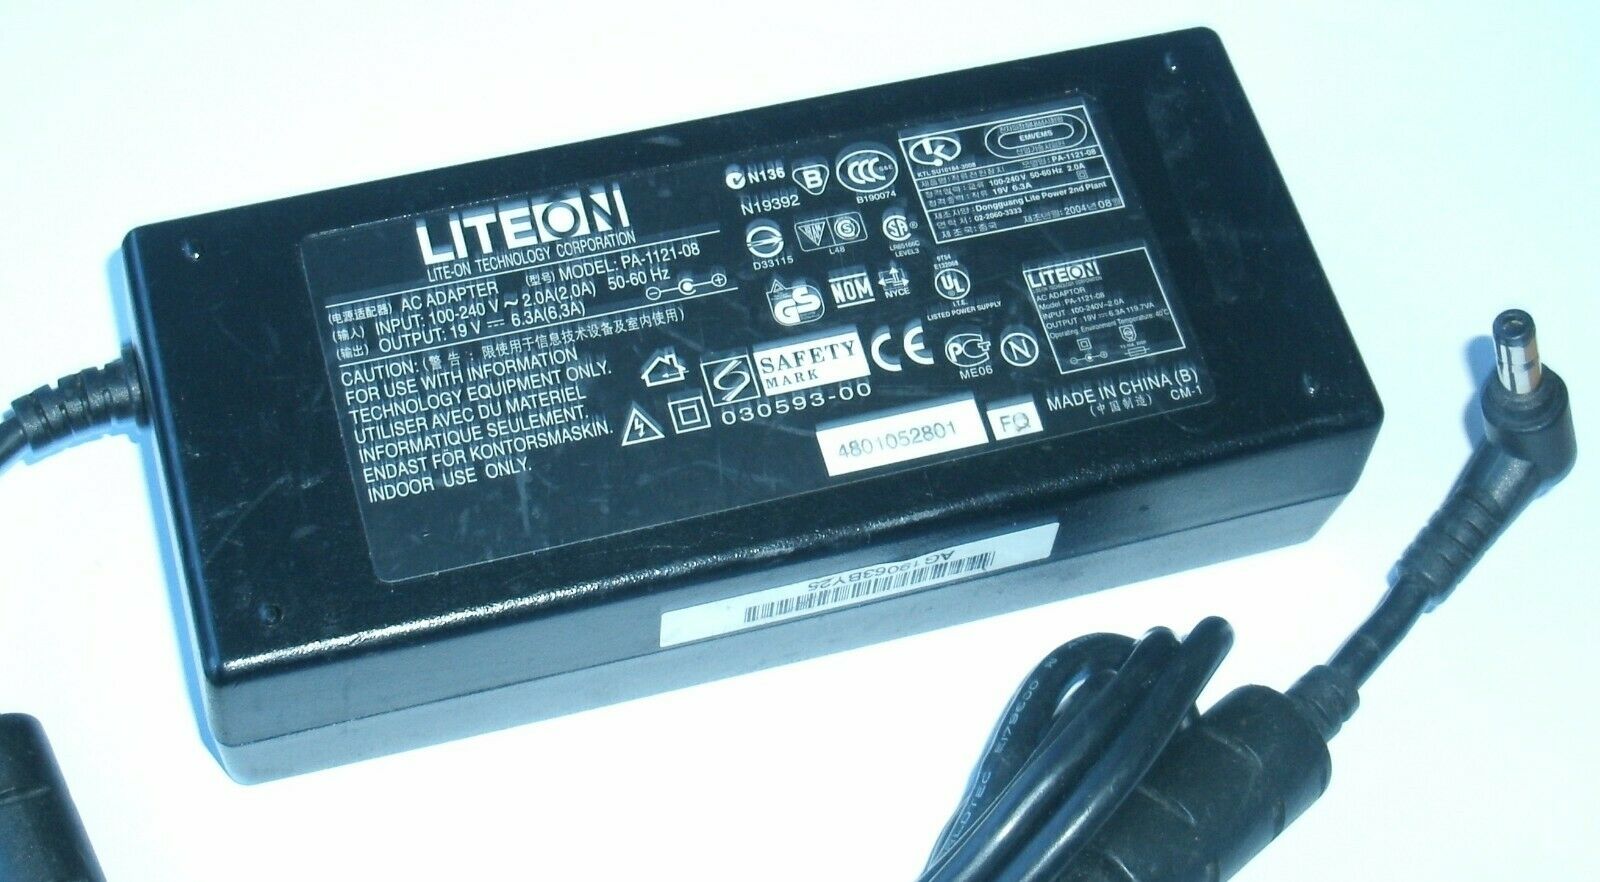 New LITEON PA-1121-08 19V 6.3A AC ADAPTER power charger with power cord Specification: Brand:LITE - Click Image to Close